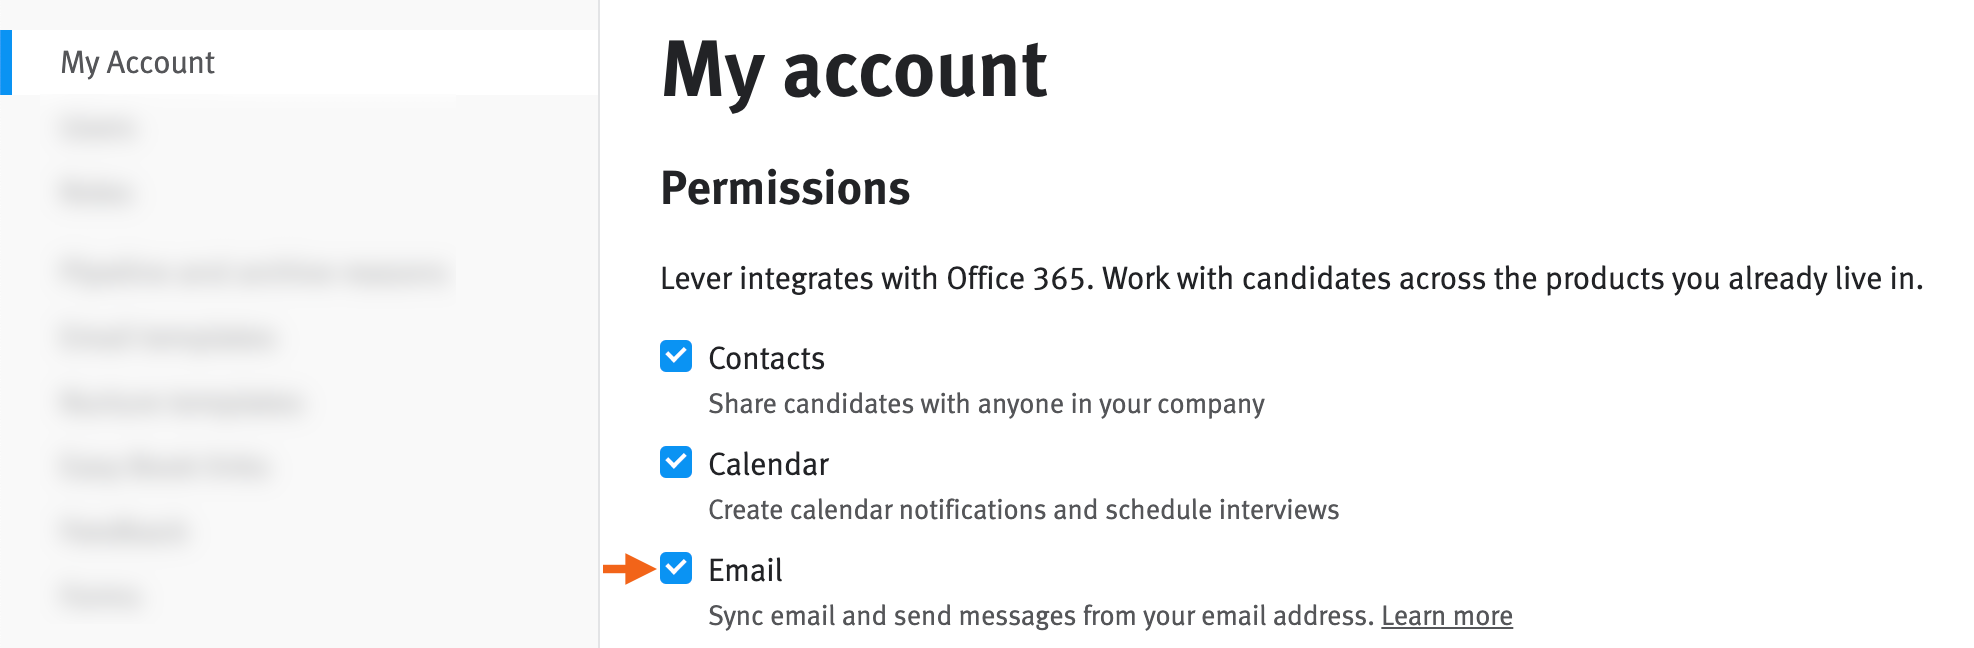 Permissions checkboxes on account settings page with arrow pointing to email permission checkbox.